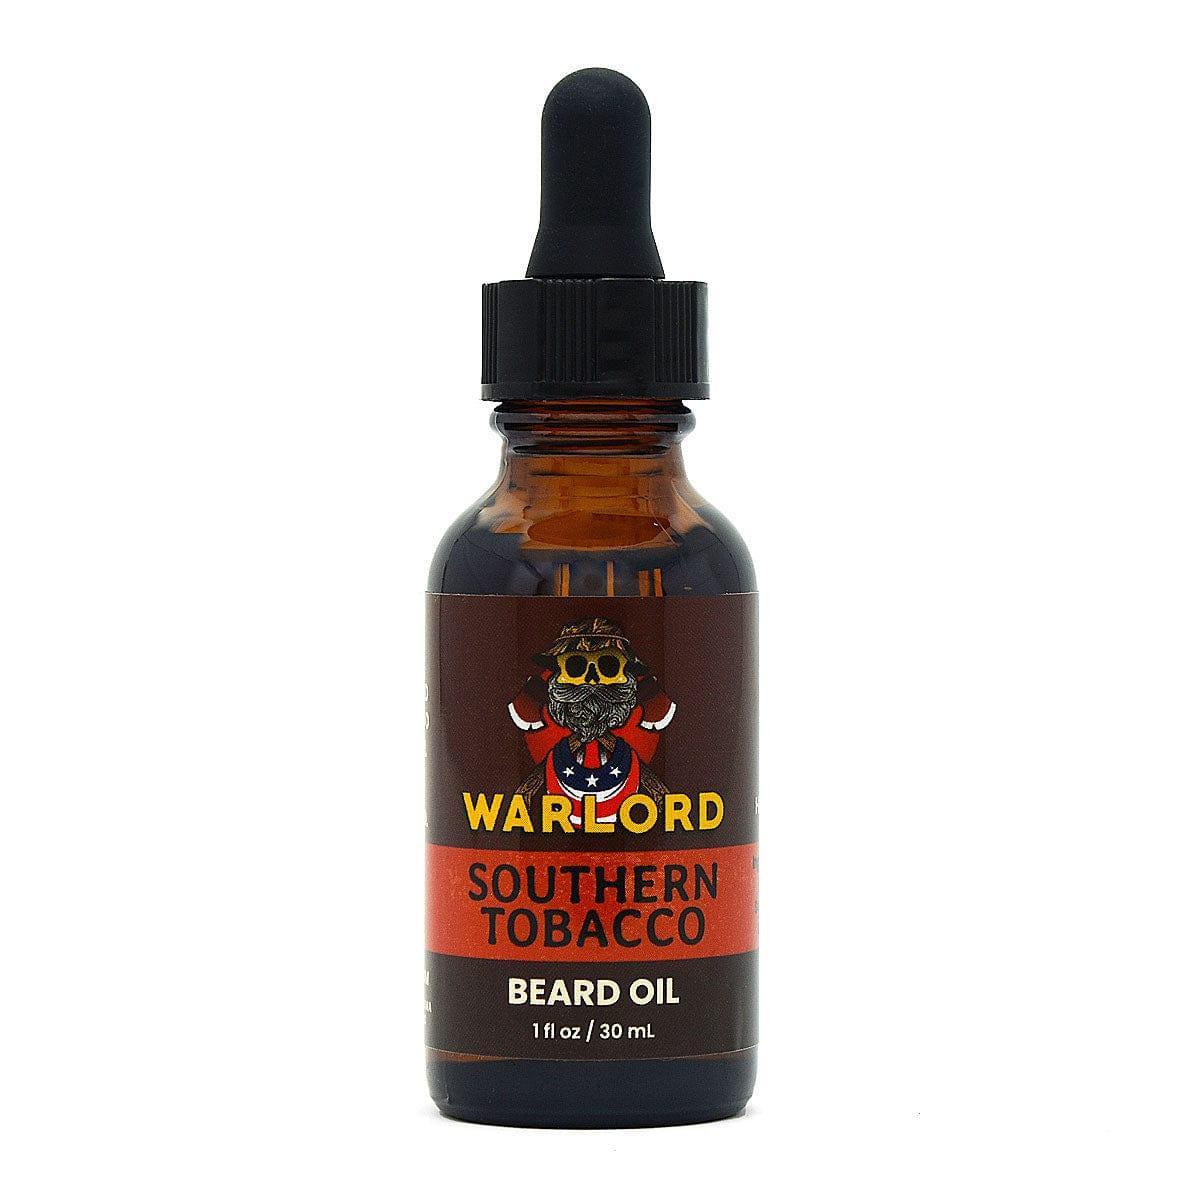 Southern Tobacco Beard Oil - Warlord - Men's Grooming Essentials